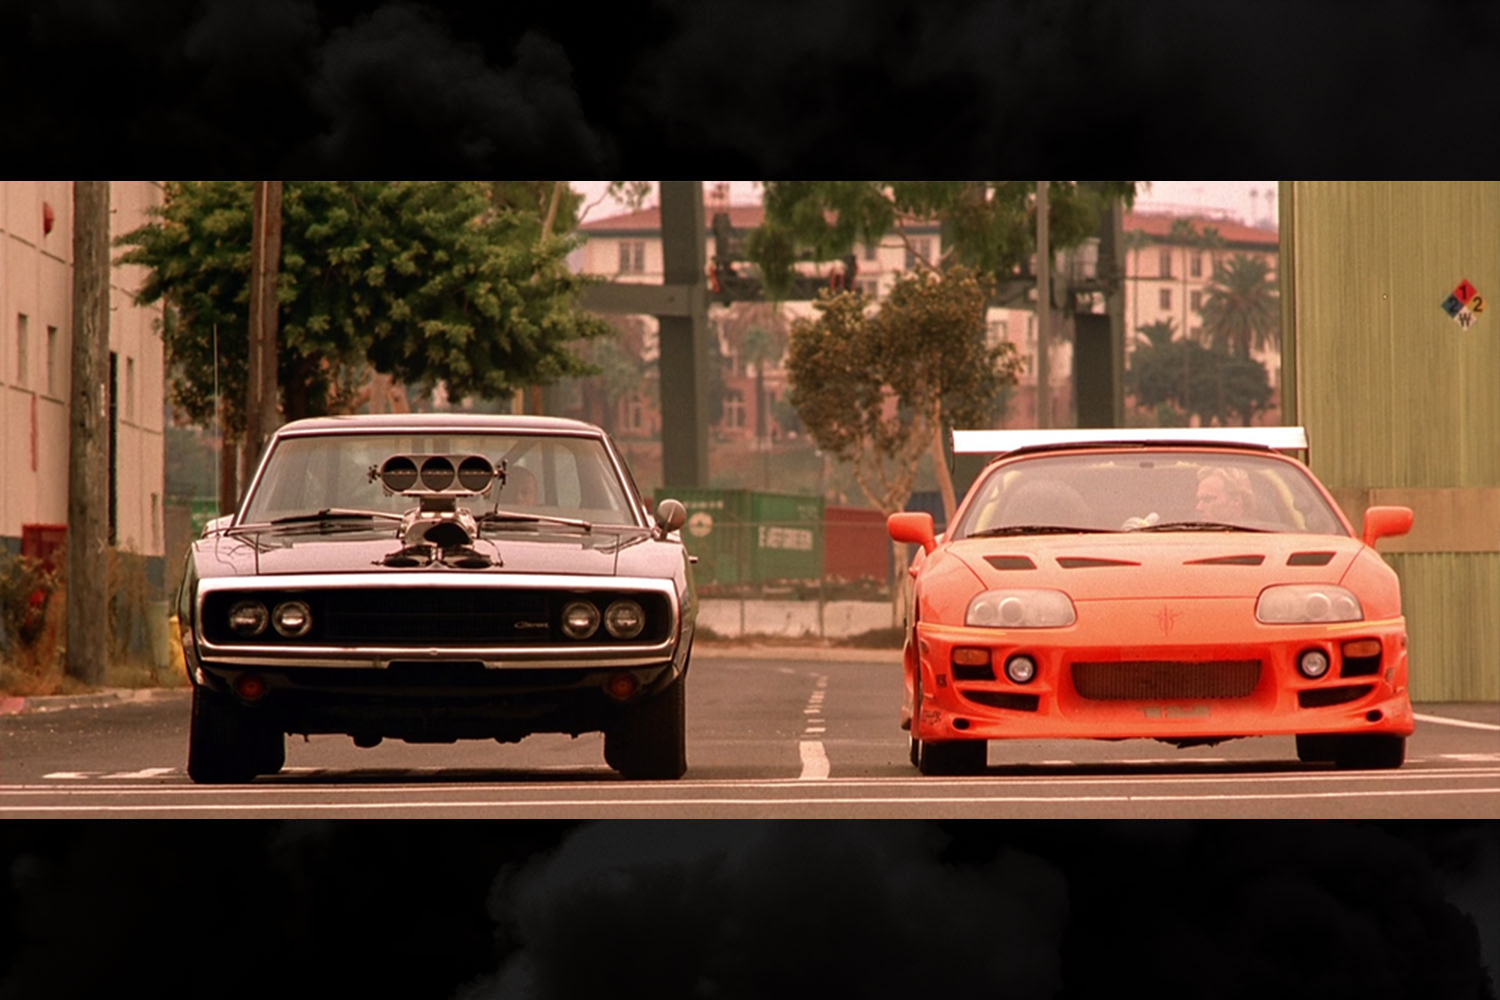 The final race in the original The Fast and the Furious, Dom's ridiculous 1970 Dodge Charger R/T versus Brian's 1994 Toyota Supra MK IV